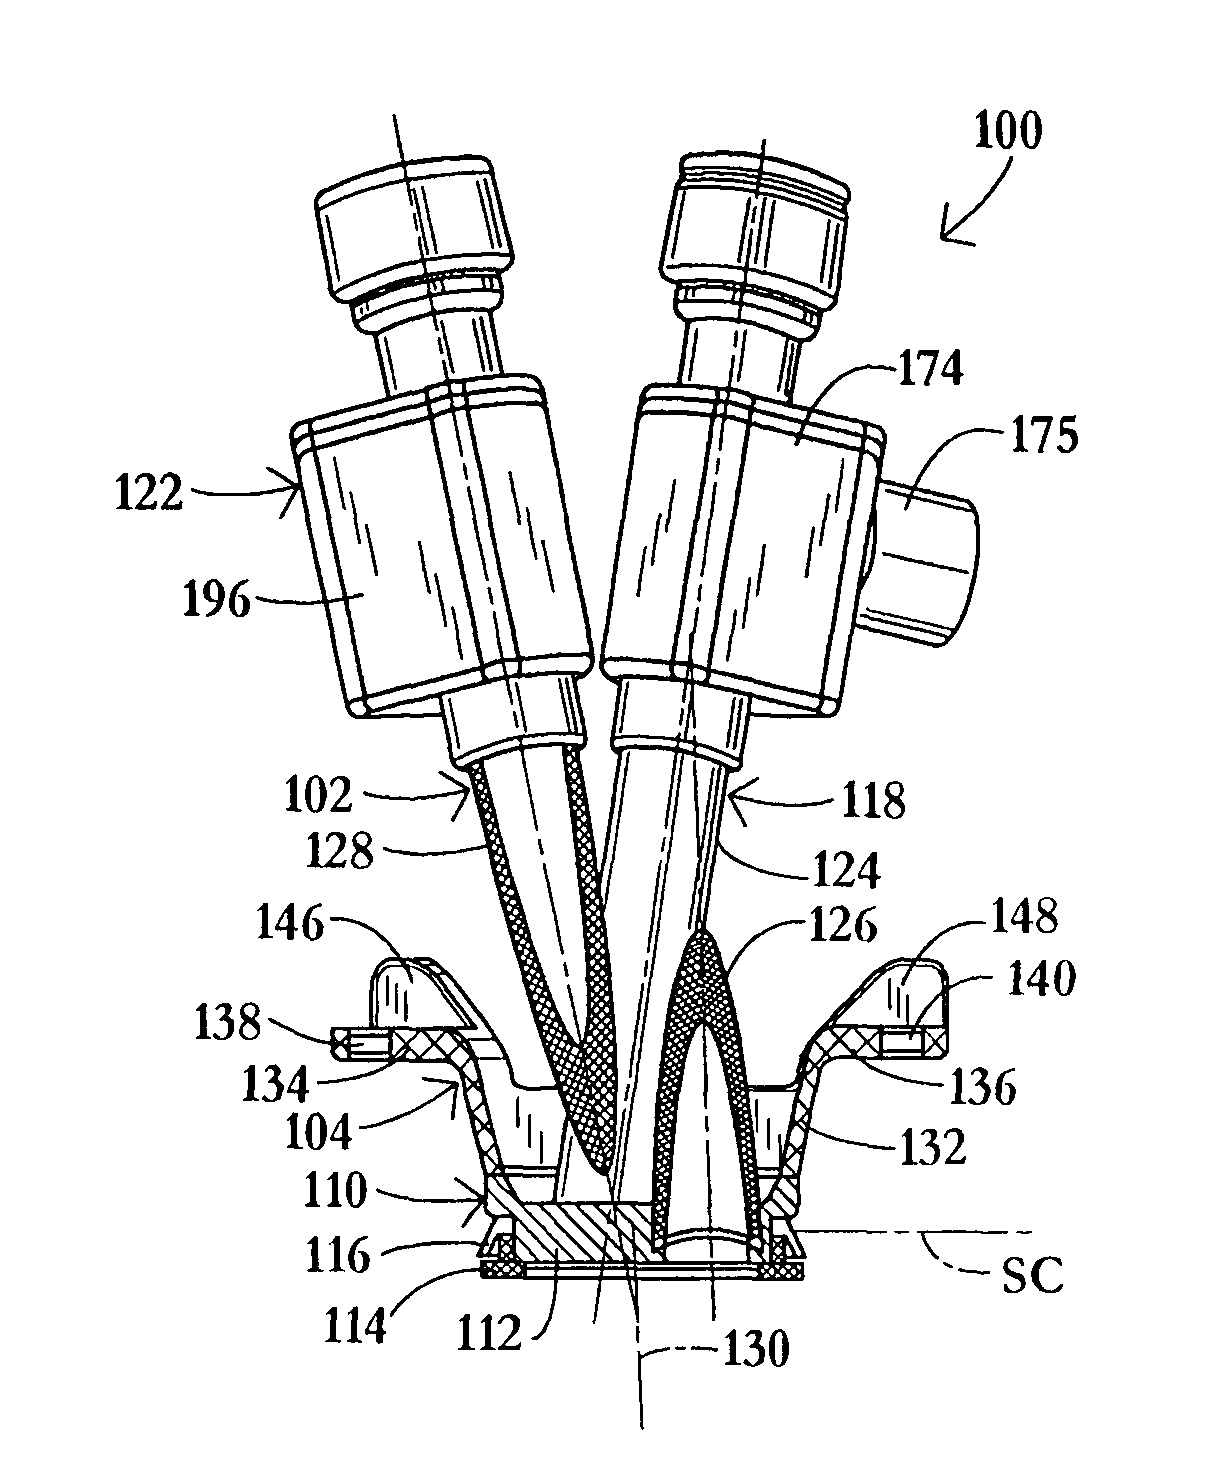 Laparoscopic instrument and cannula assembly and related surgical method